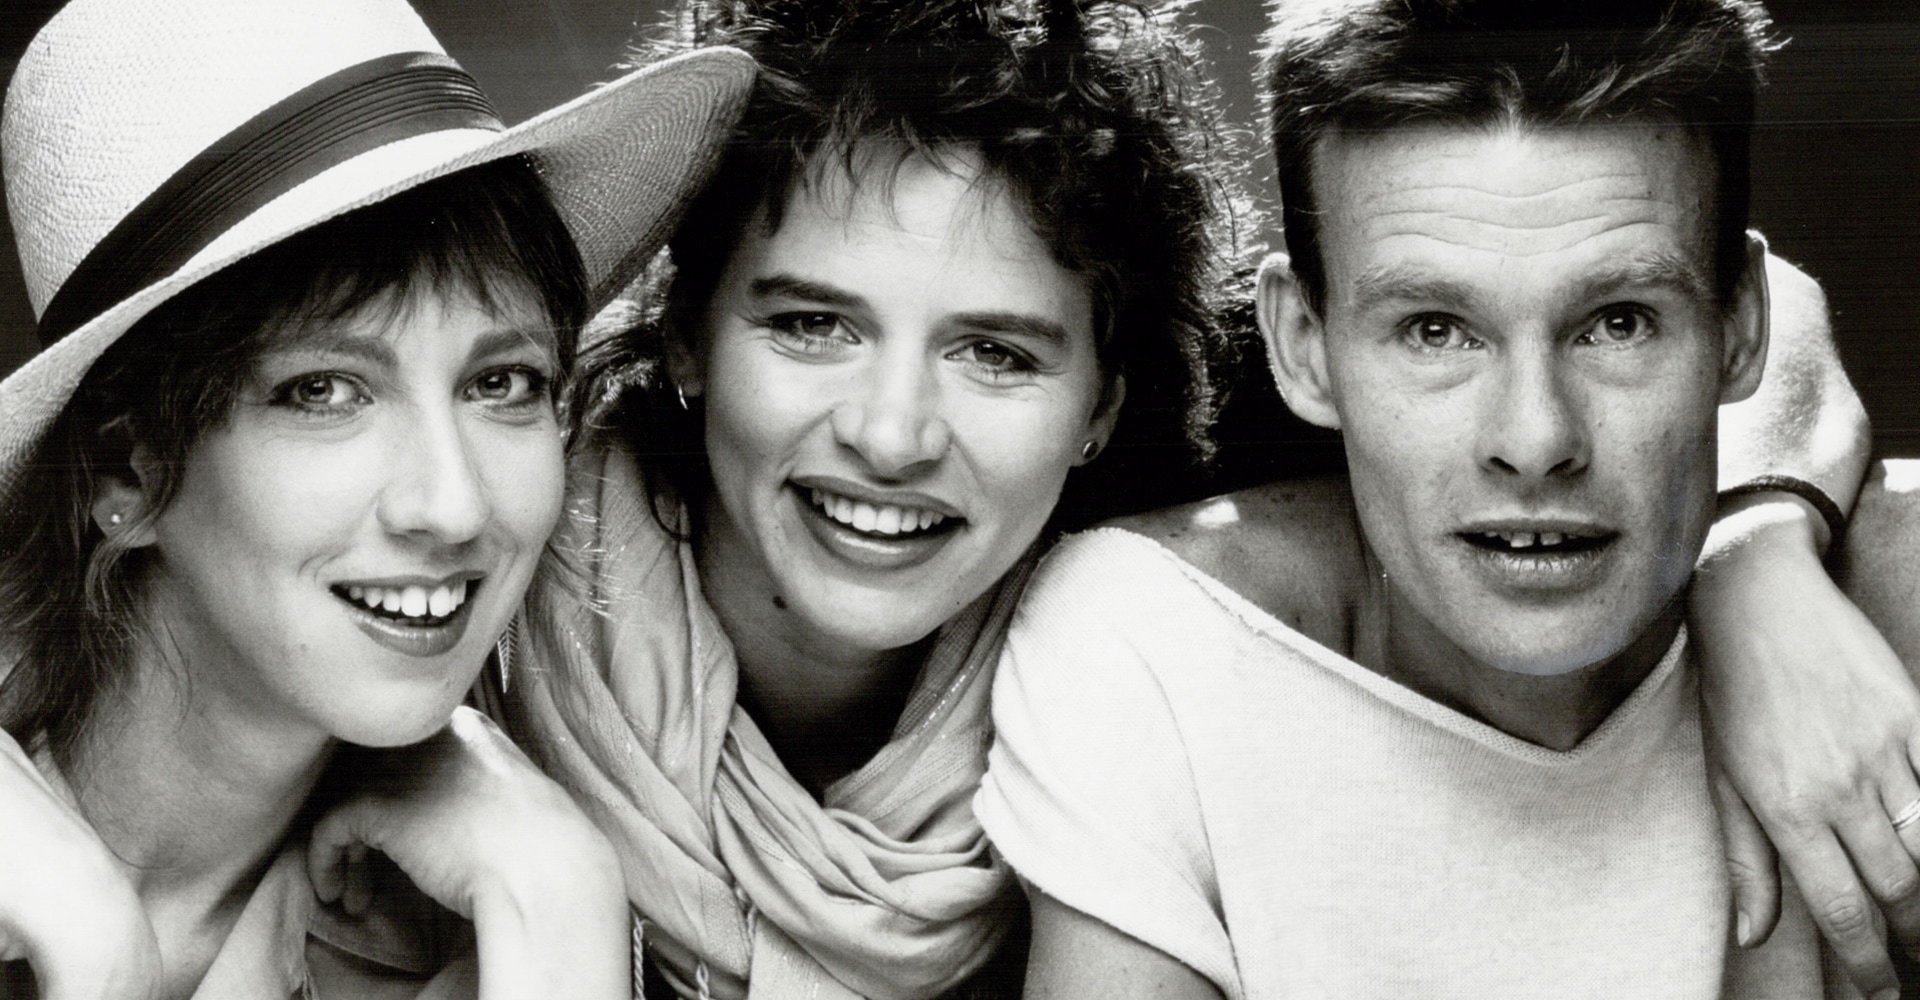 A group of three people, two women on the left, and a man at the right look into the camera. The woman on the left is wearing a hat. All have their mouths open in a slight smile.